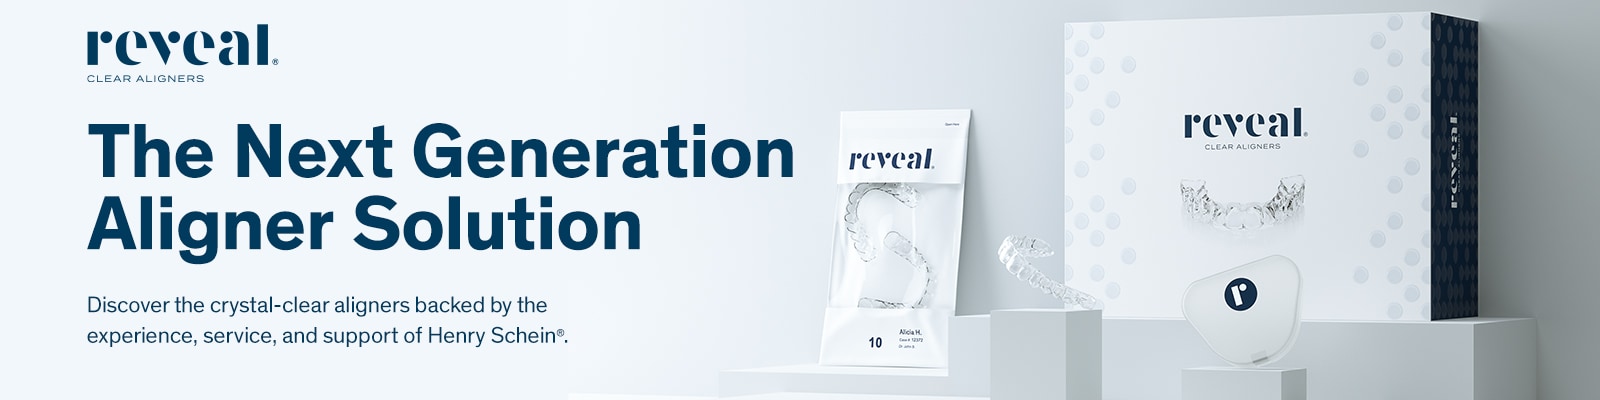 Reveal Clear Aligners - The Next Generation Clear Aligner Solution